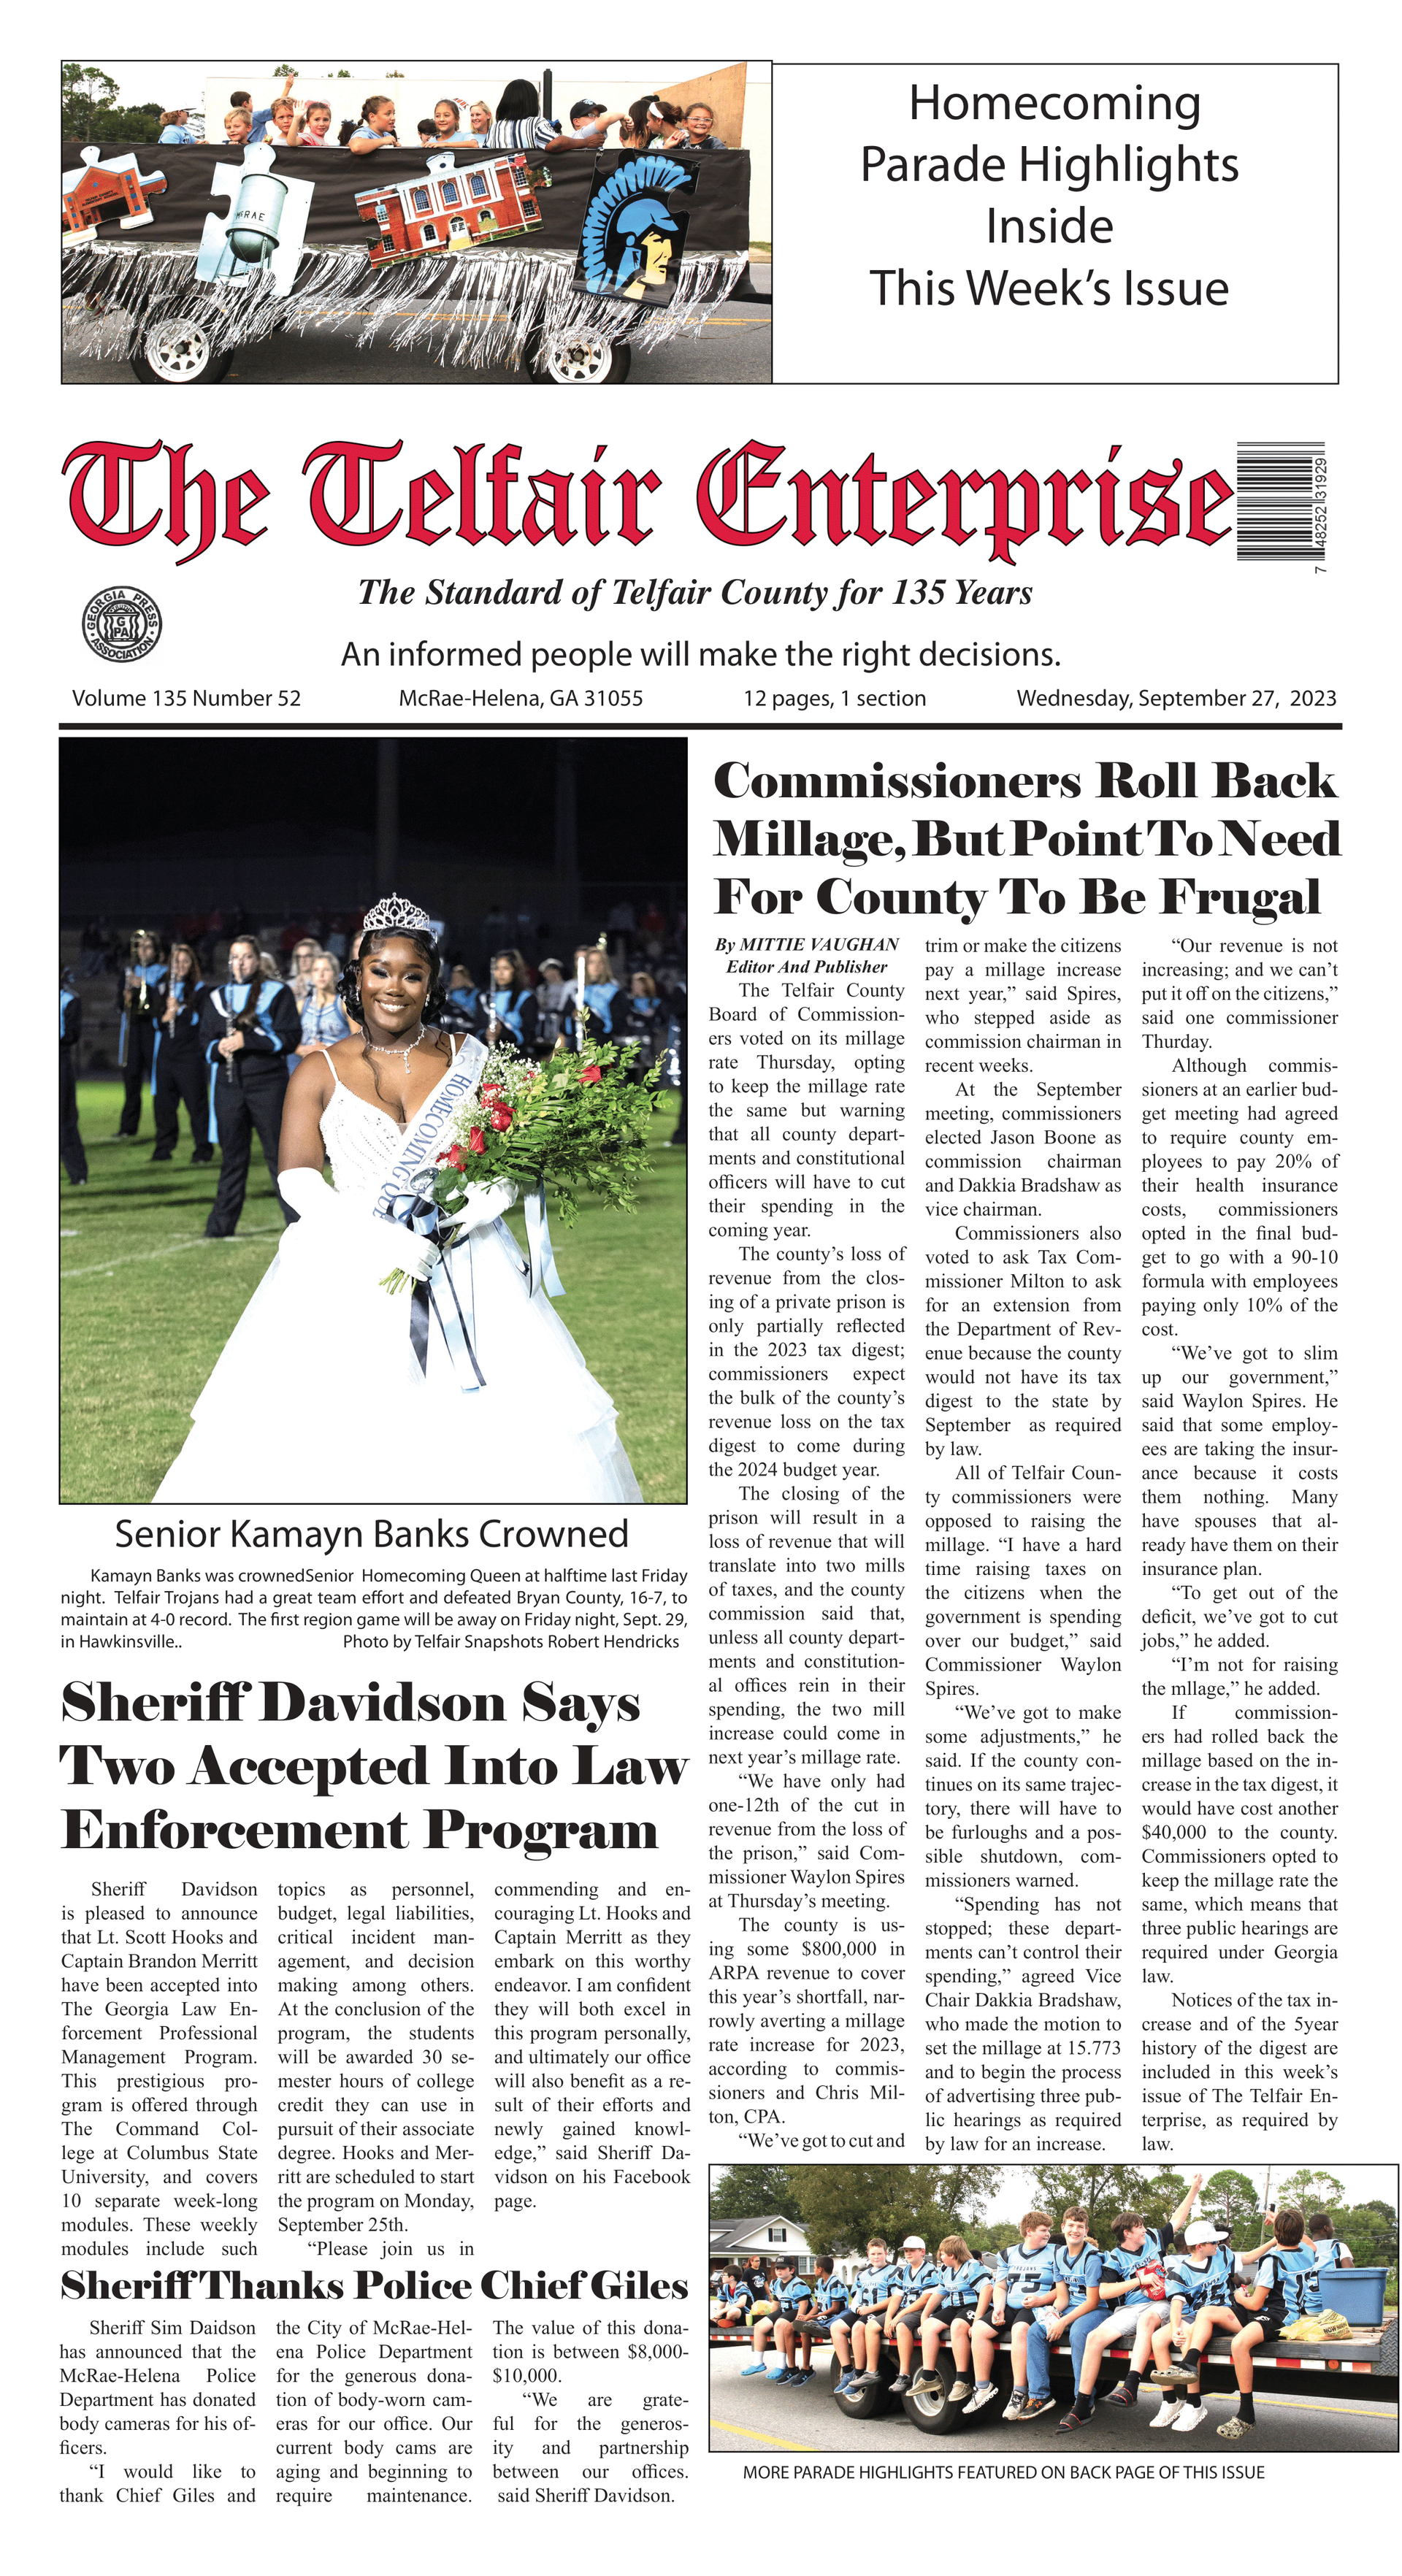 A woman in a wedding dress is on the front page of a newspaper.